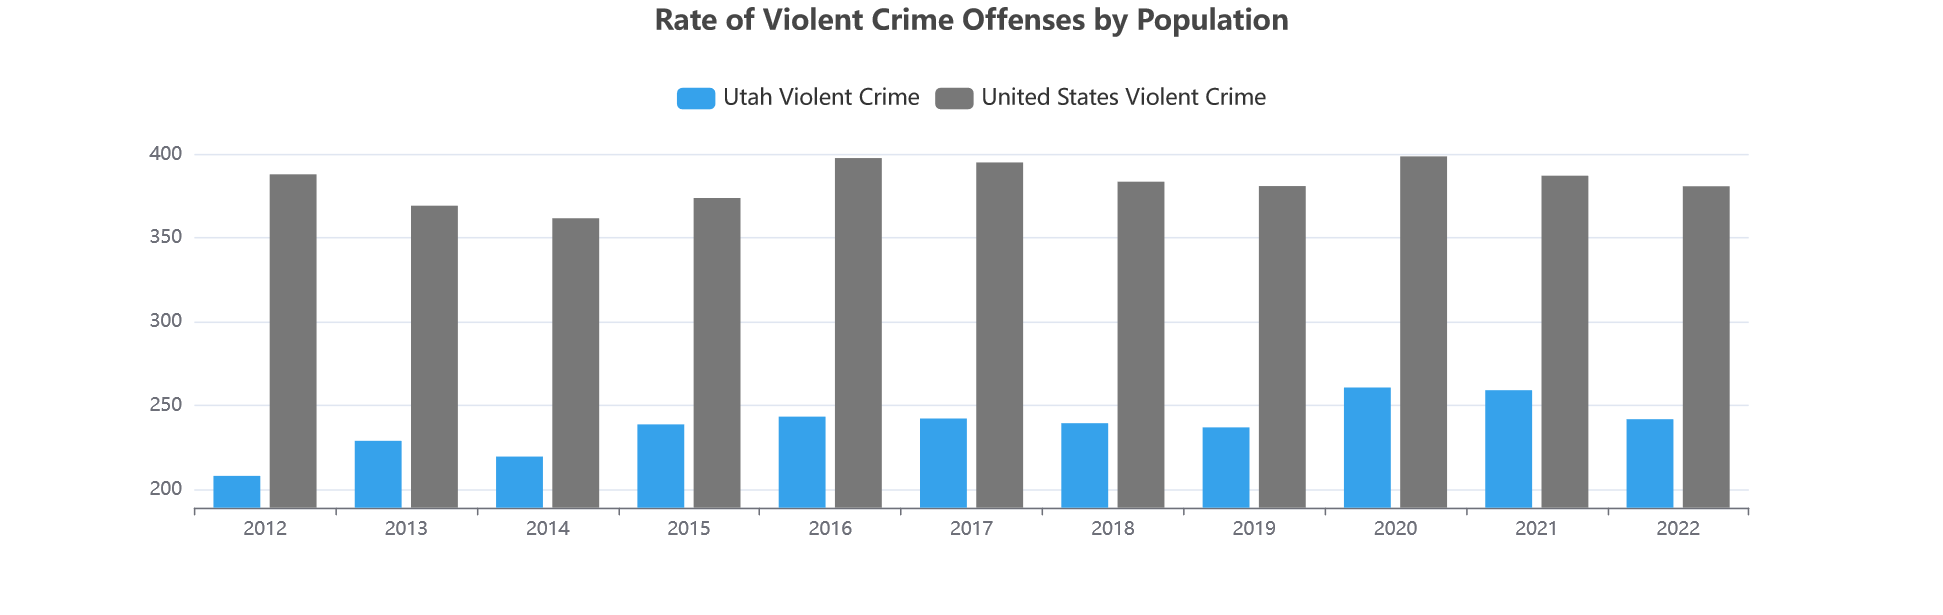 Rate of Violent Crime Offenses by Population